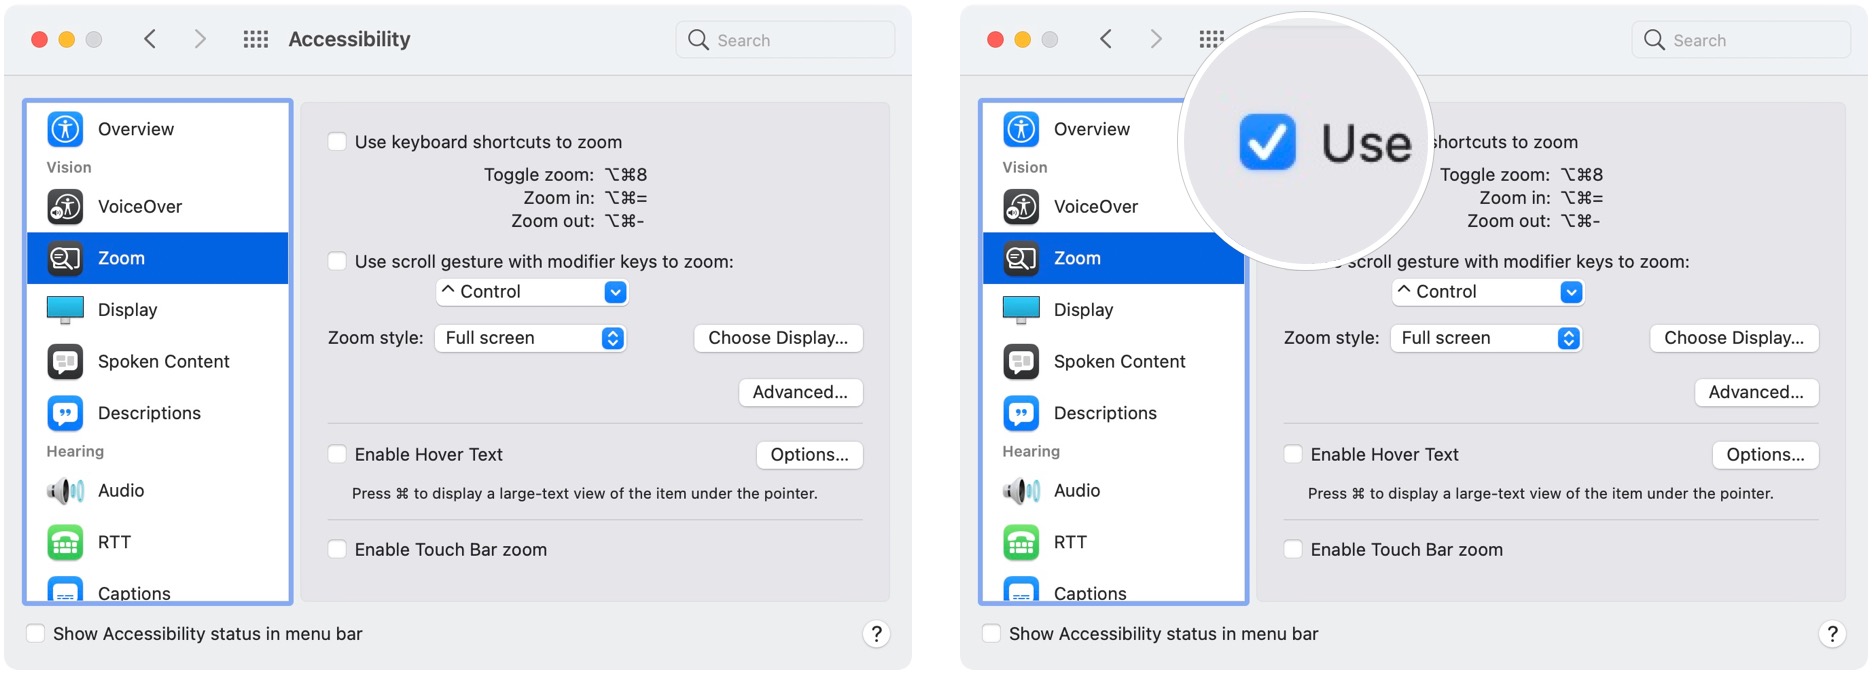 To enable shortcuts for Accessibility zoom, click Zoom on the menu on the left, then click the checkbox next to Use keyboard shortcuts to Zoom.